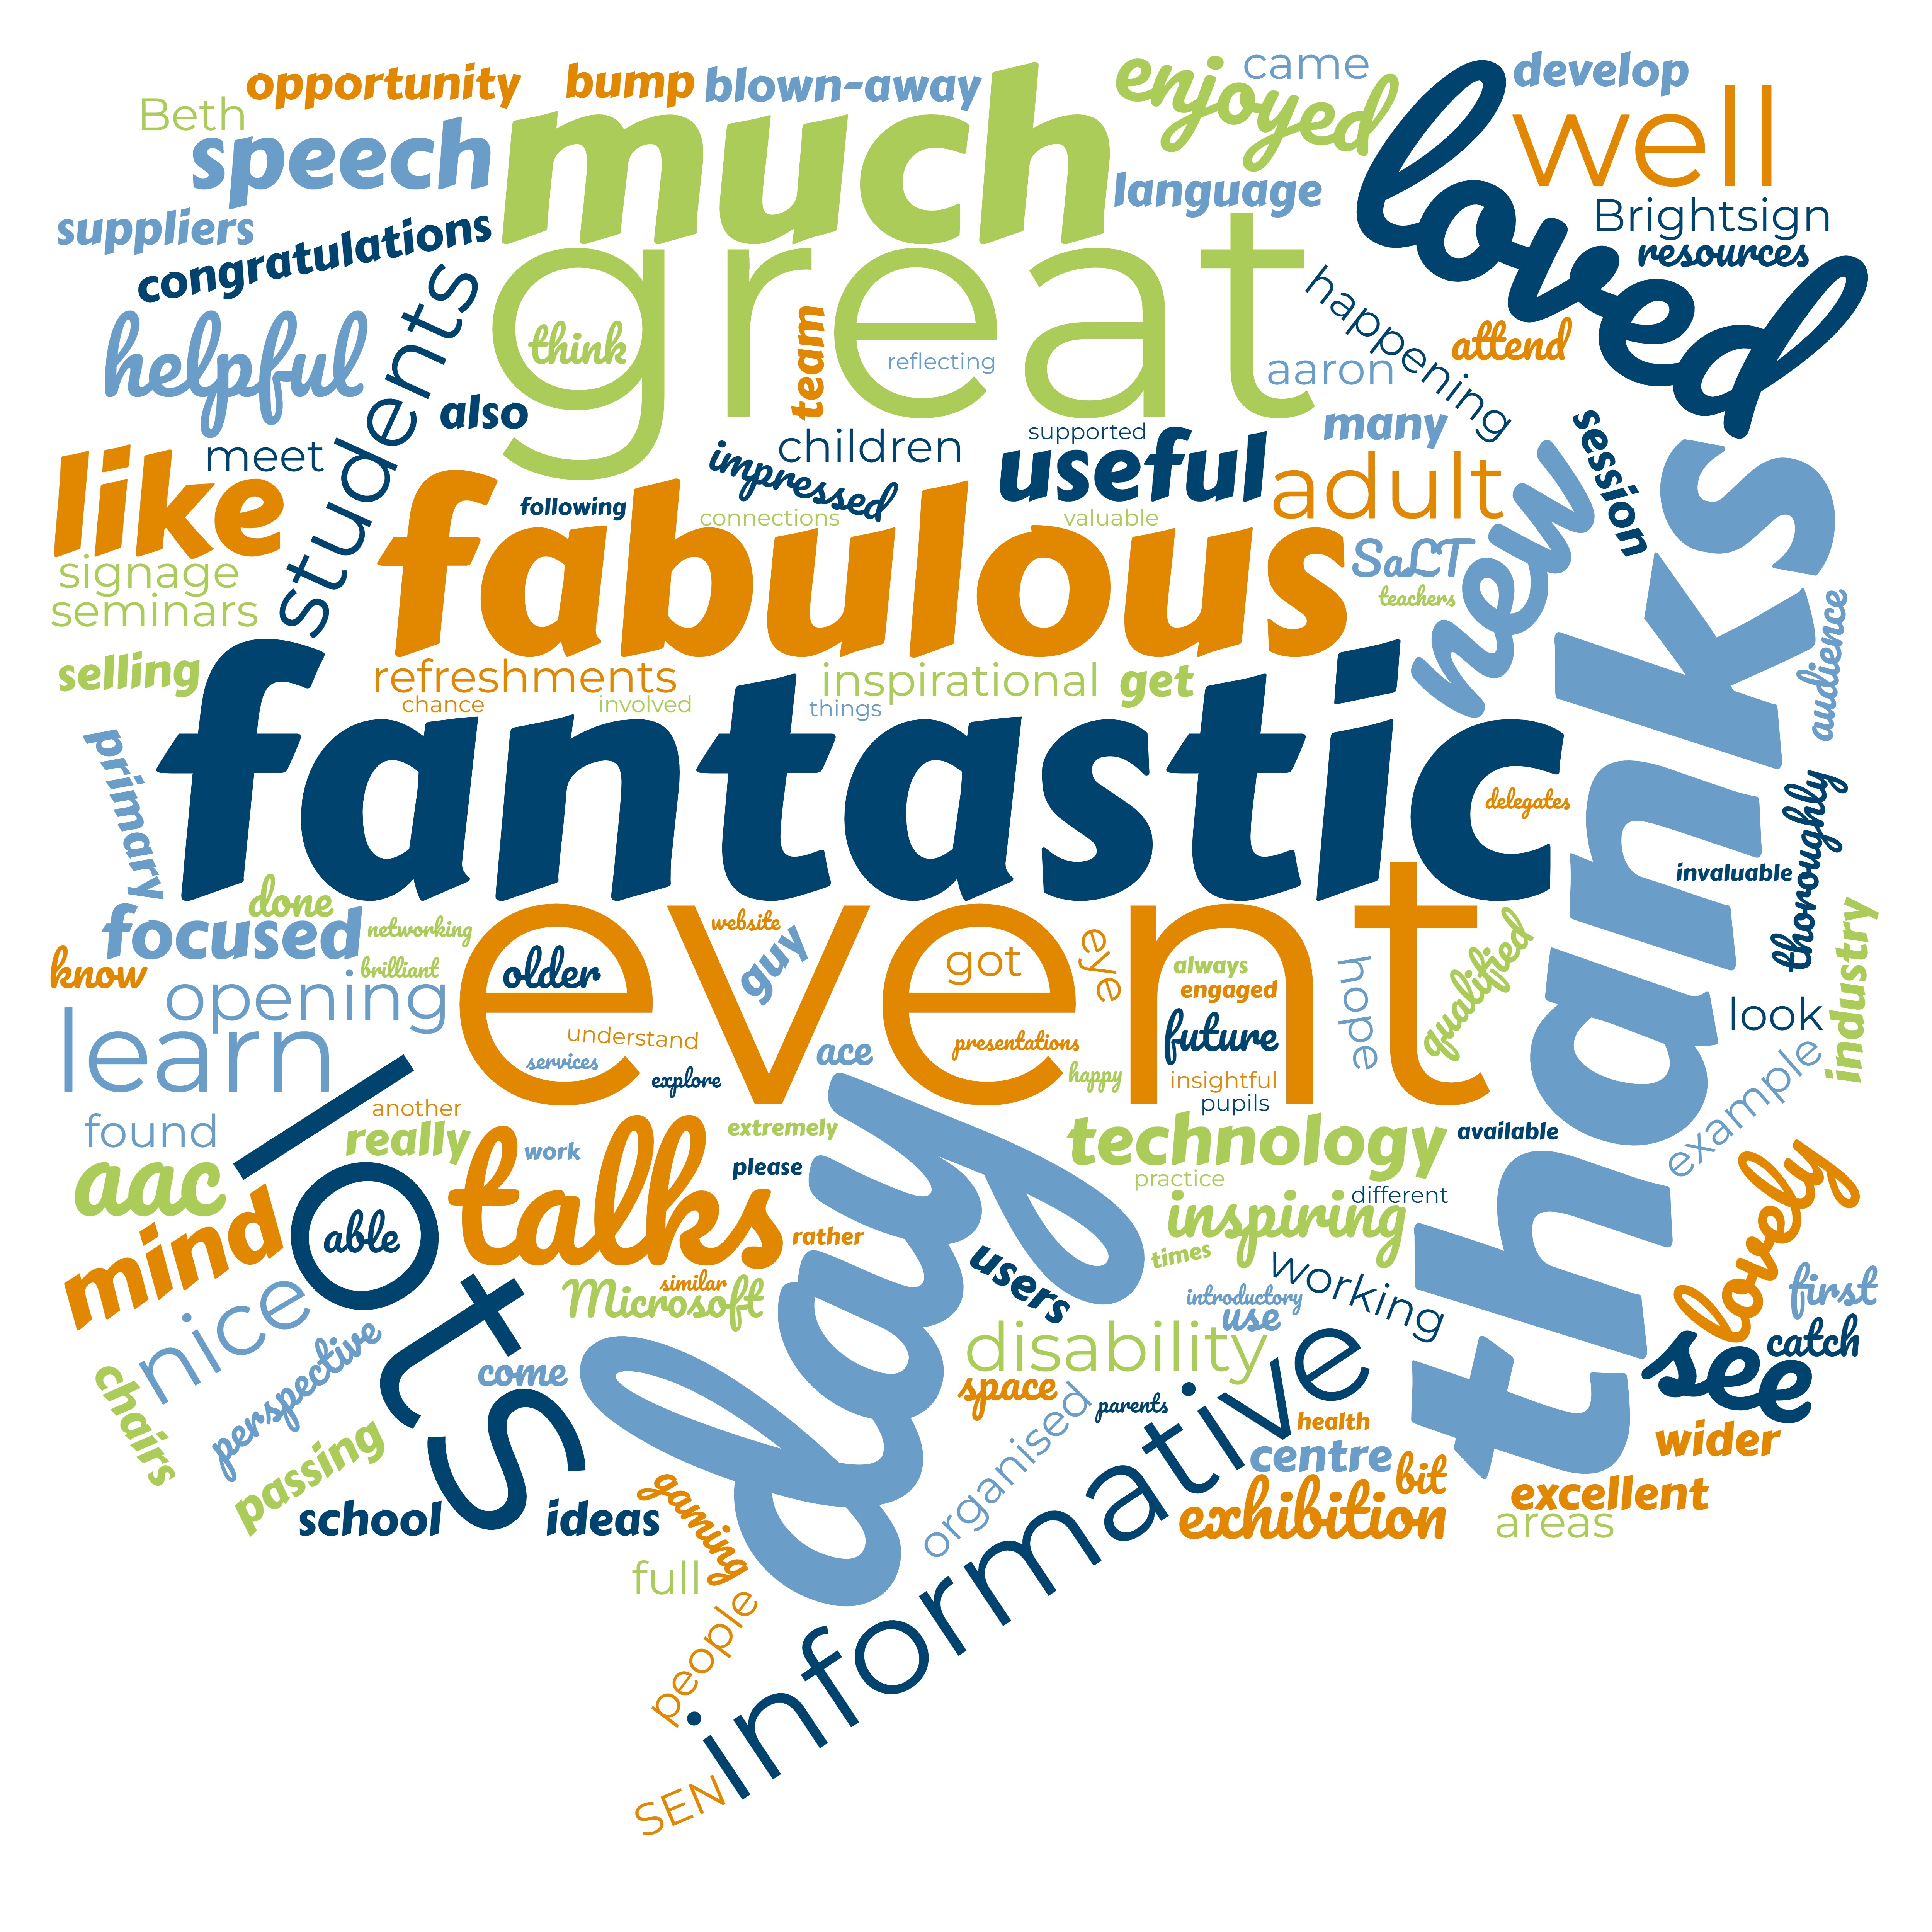 A word cloud filled with words given as feedback from the day. The words much, great, fabulous, fantastic, event, thanks and day are very boldly seen amongst many other words